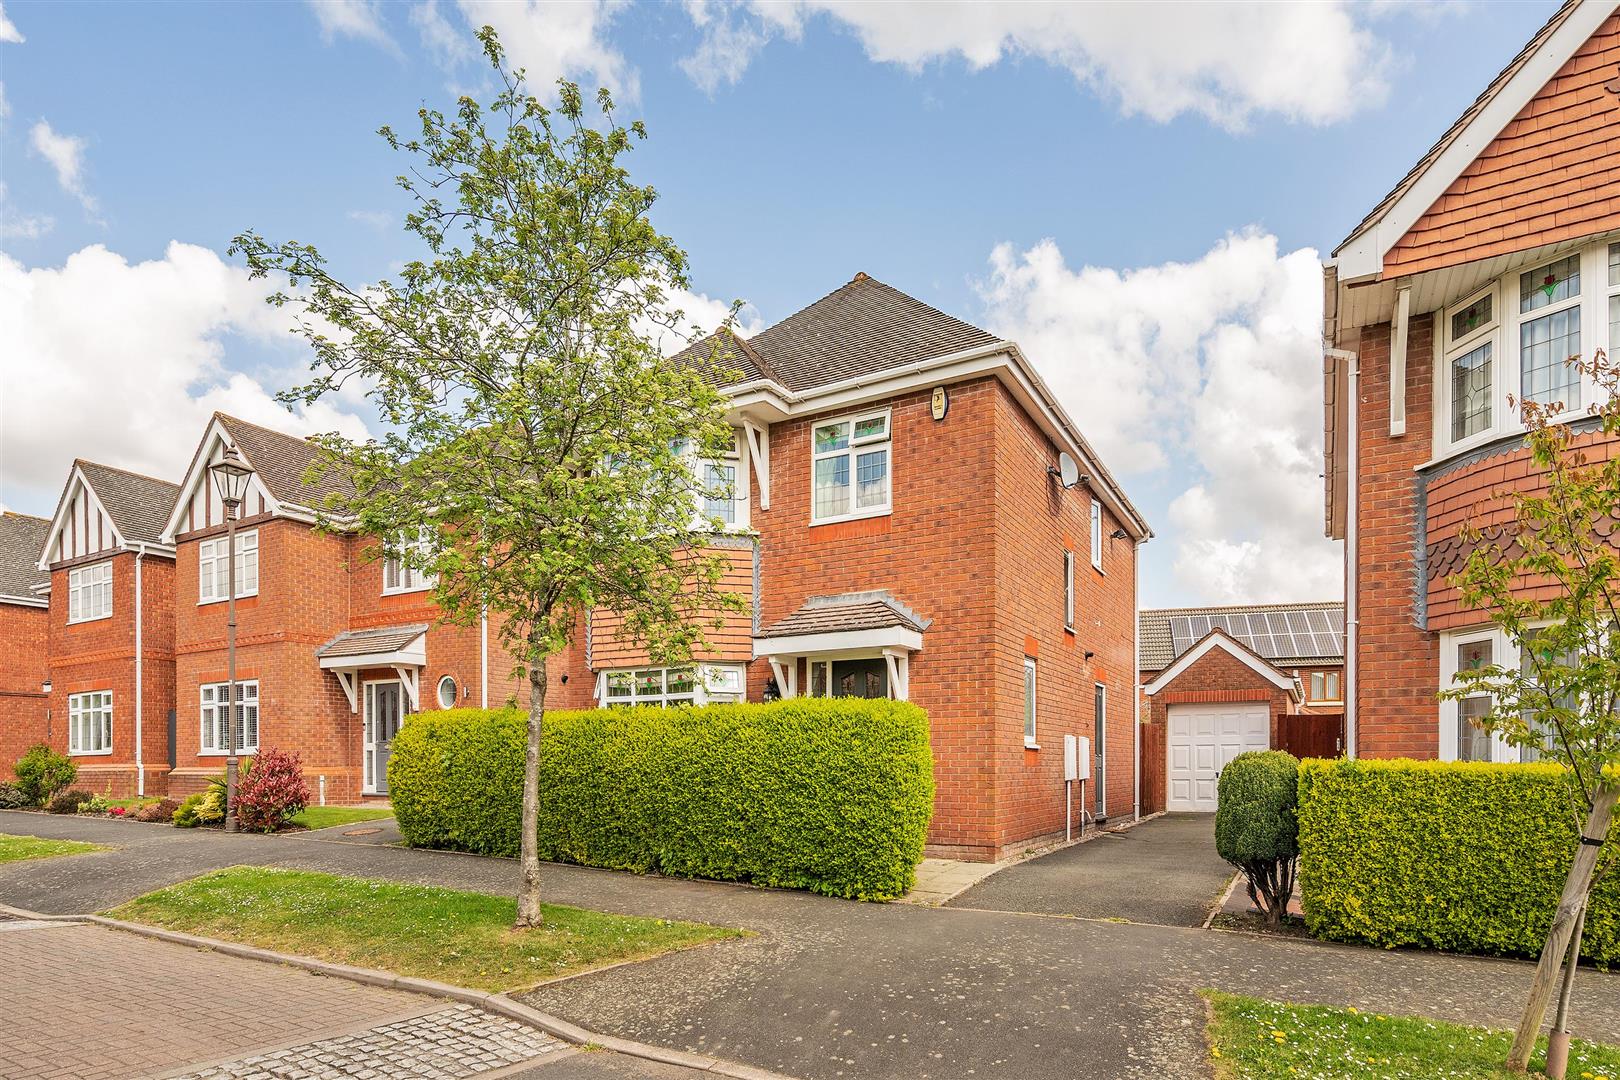 4 bed detached house for sale in Brixfield Way, Solihull - Property Image 1